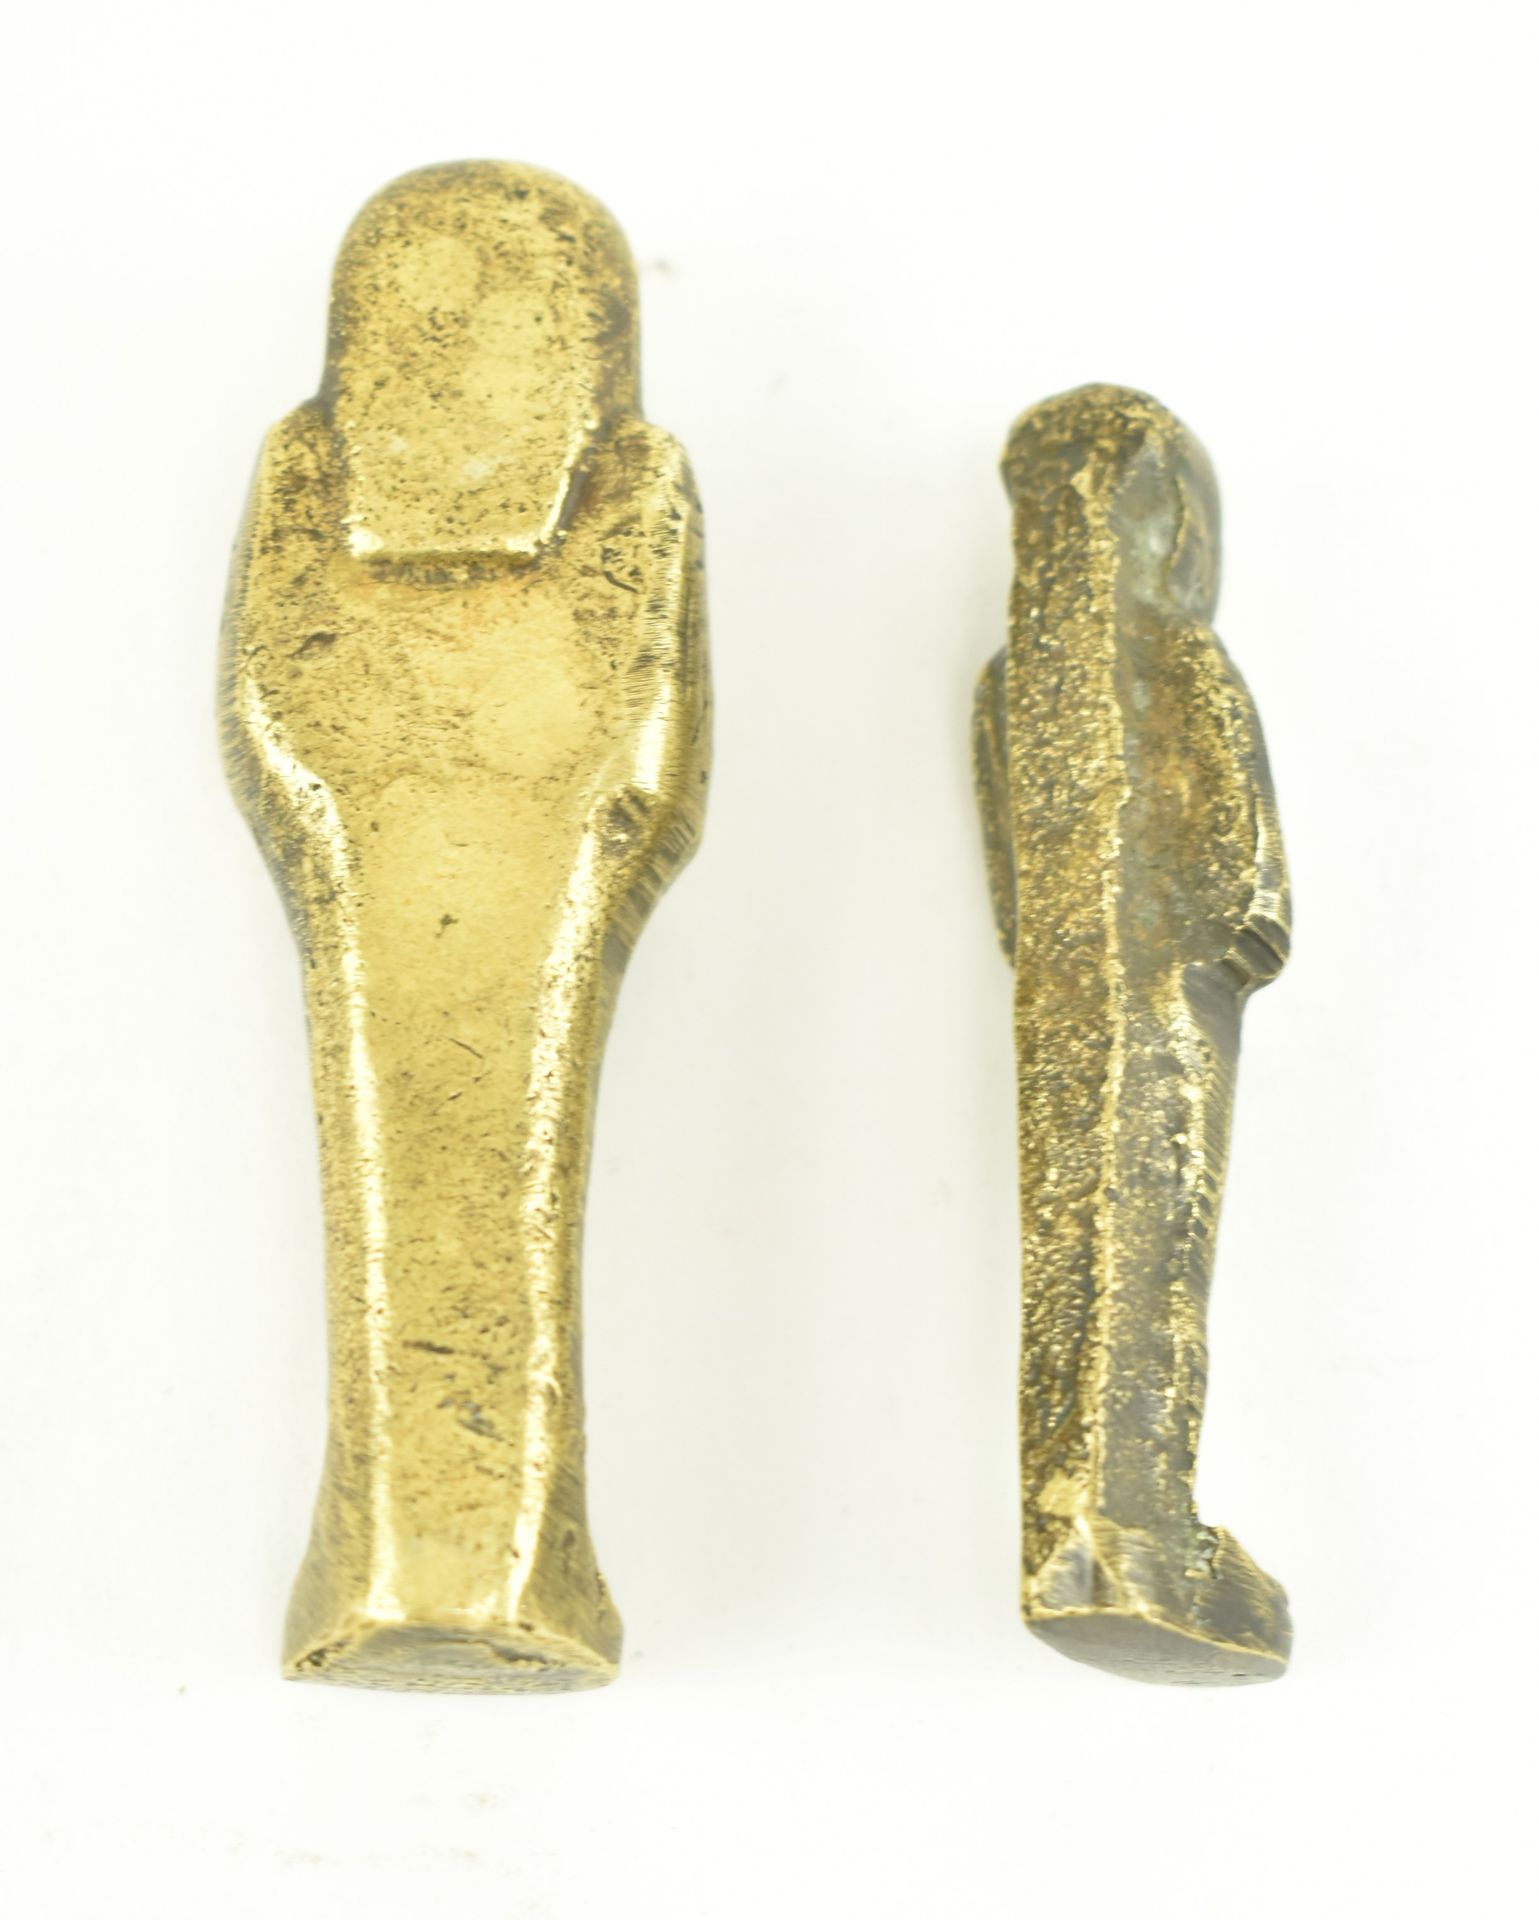 TWO EGYPTIAN GRAND TOUR SOLID BRASS FIGURINES OF PHARAOHS - Image 5 of 5